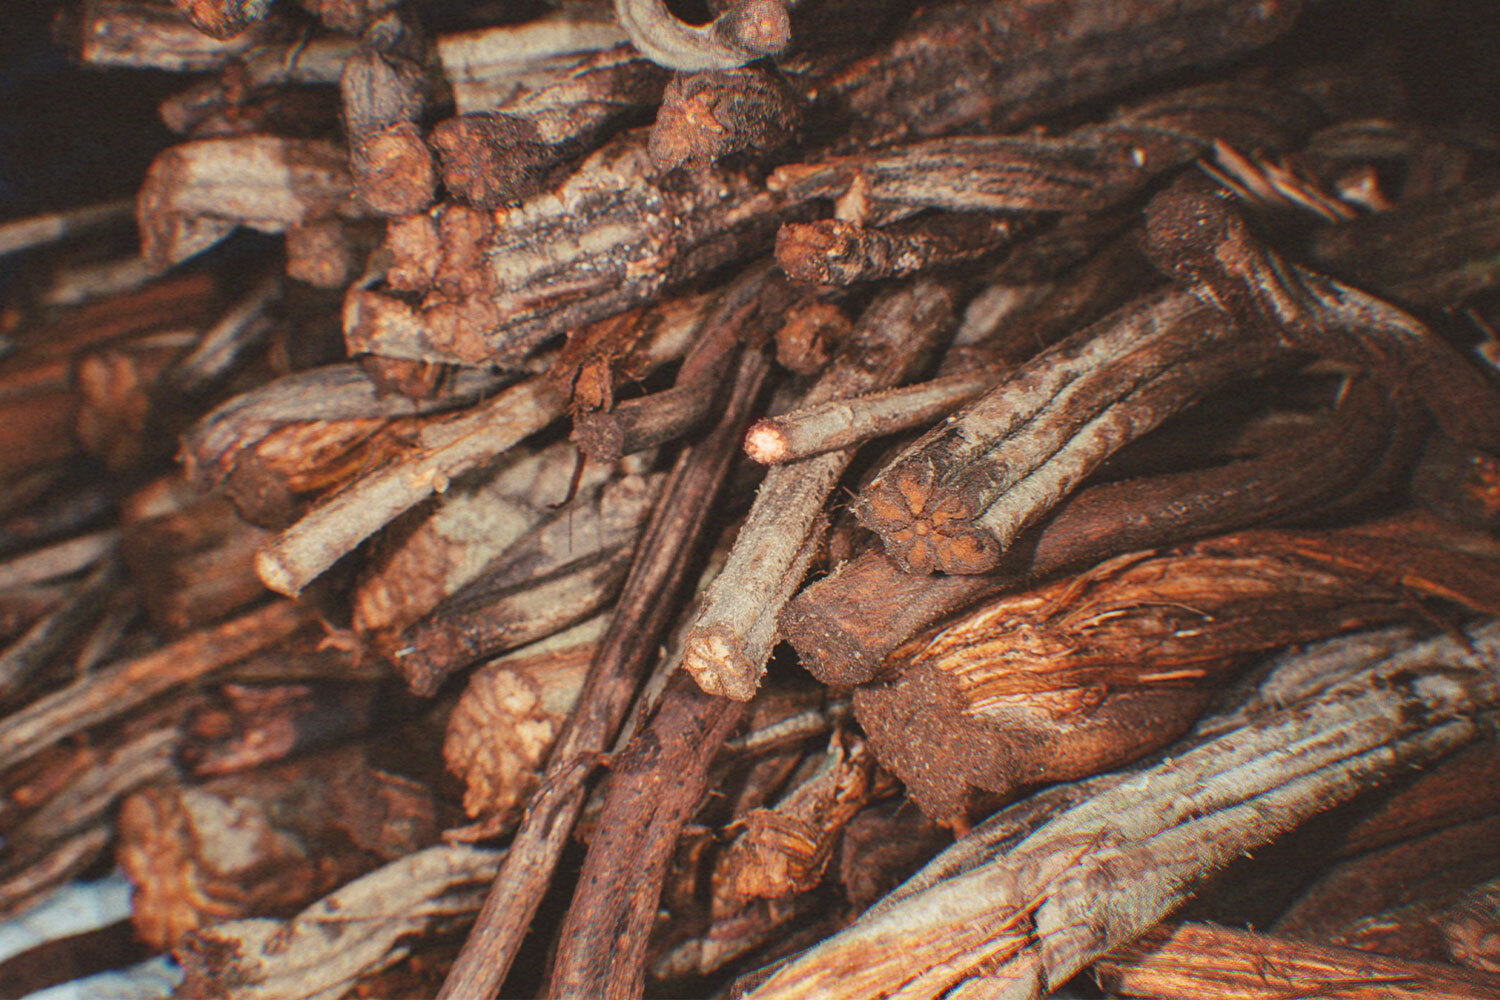 A pile of Banisteriopsis caapi vines, one part of the ayahuasca formula